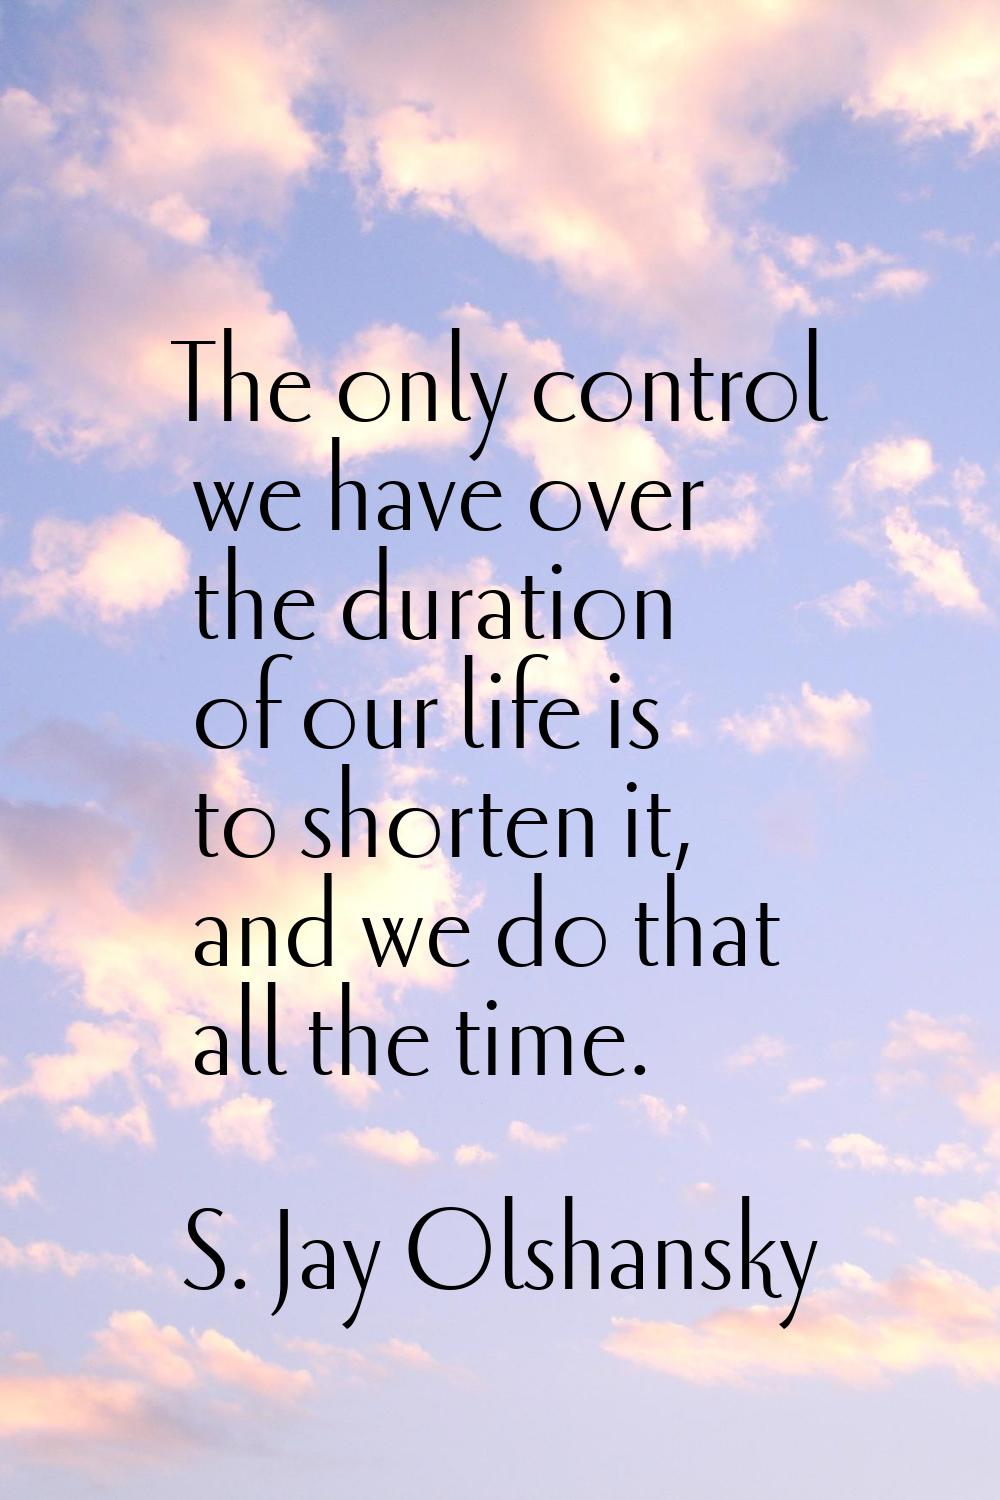 The only control we have over the duration of our life is to shorten it, and we do that all the tim